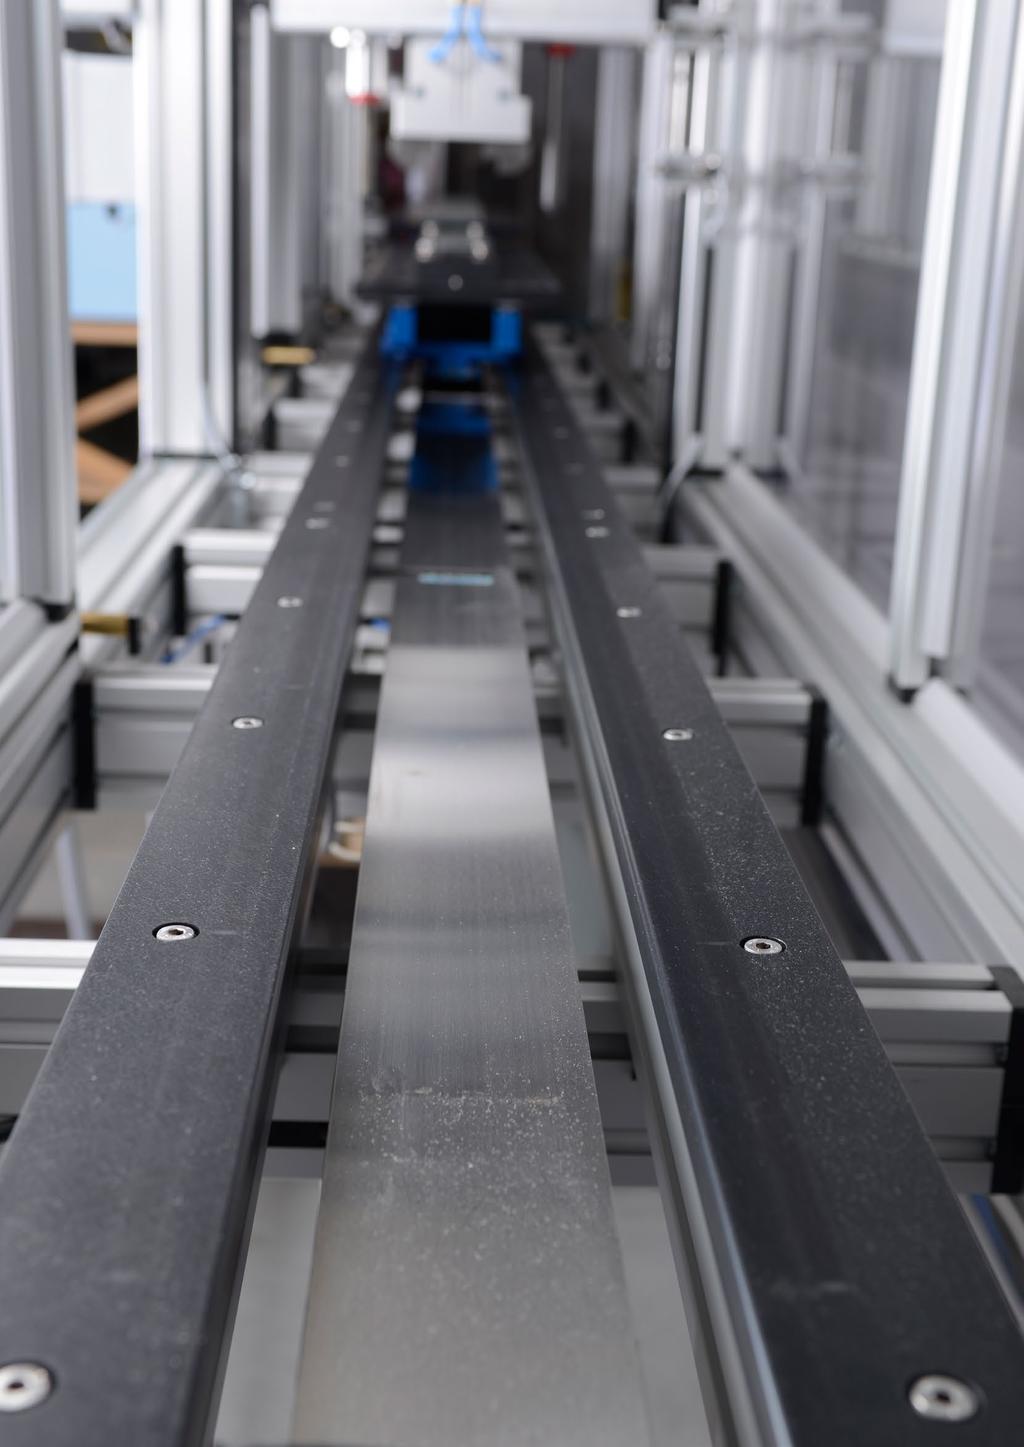 QuickStick Faster, cleaner, and more efficient than conventional systems QuickStick is the Intelligent Conveyor System that offers increased throughput and a lower cost of ownership, providing a